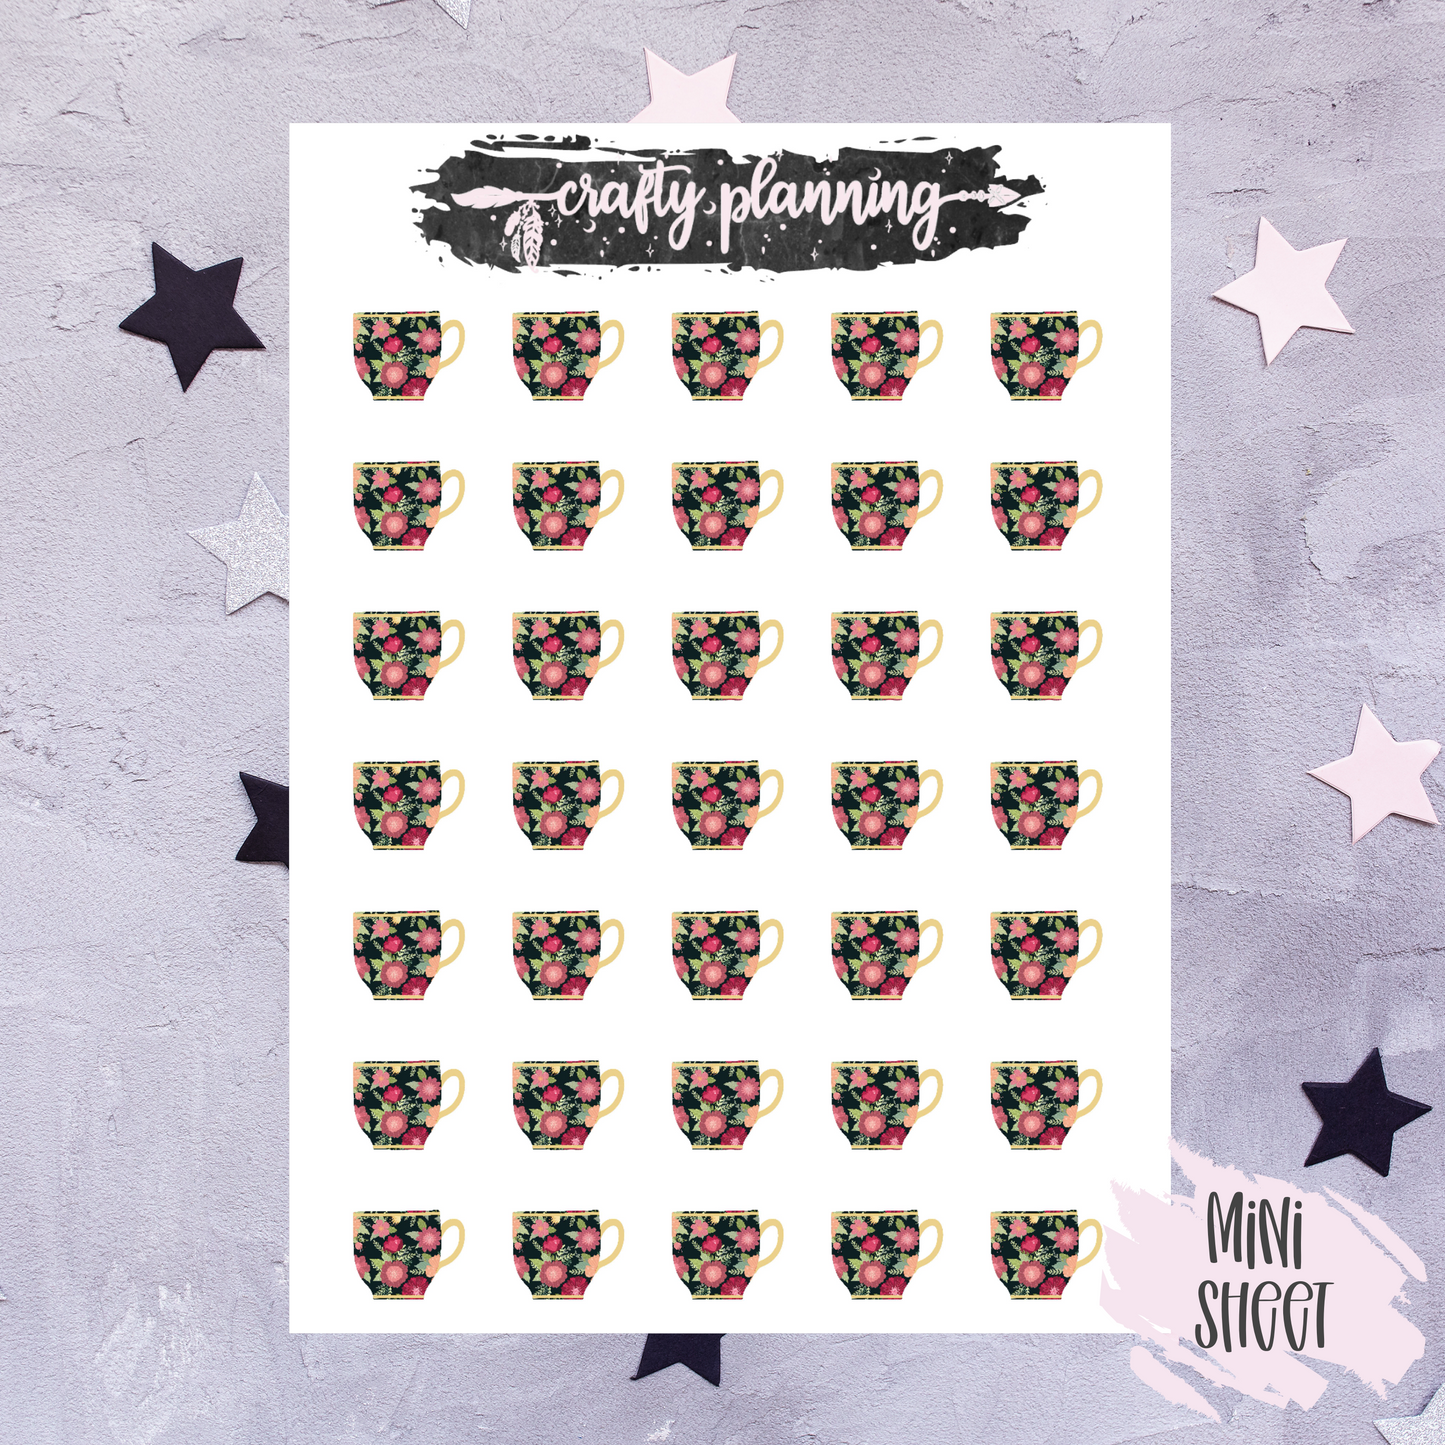 Teacup Stickers, Tea Stickers, Floral Stickers, Planner Stickers, Vintage Floral, Cup Stickers, Deco Stickers